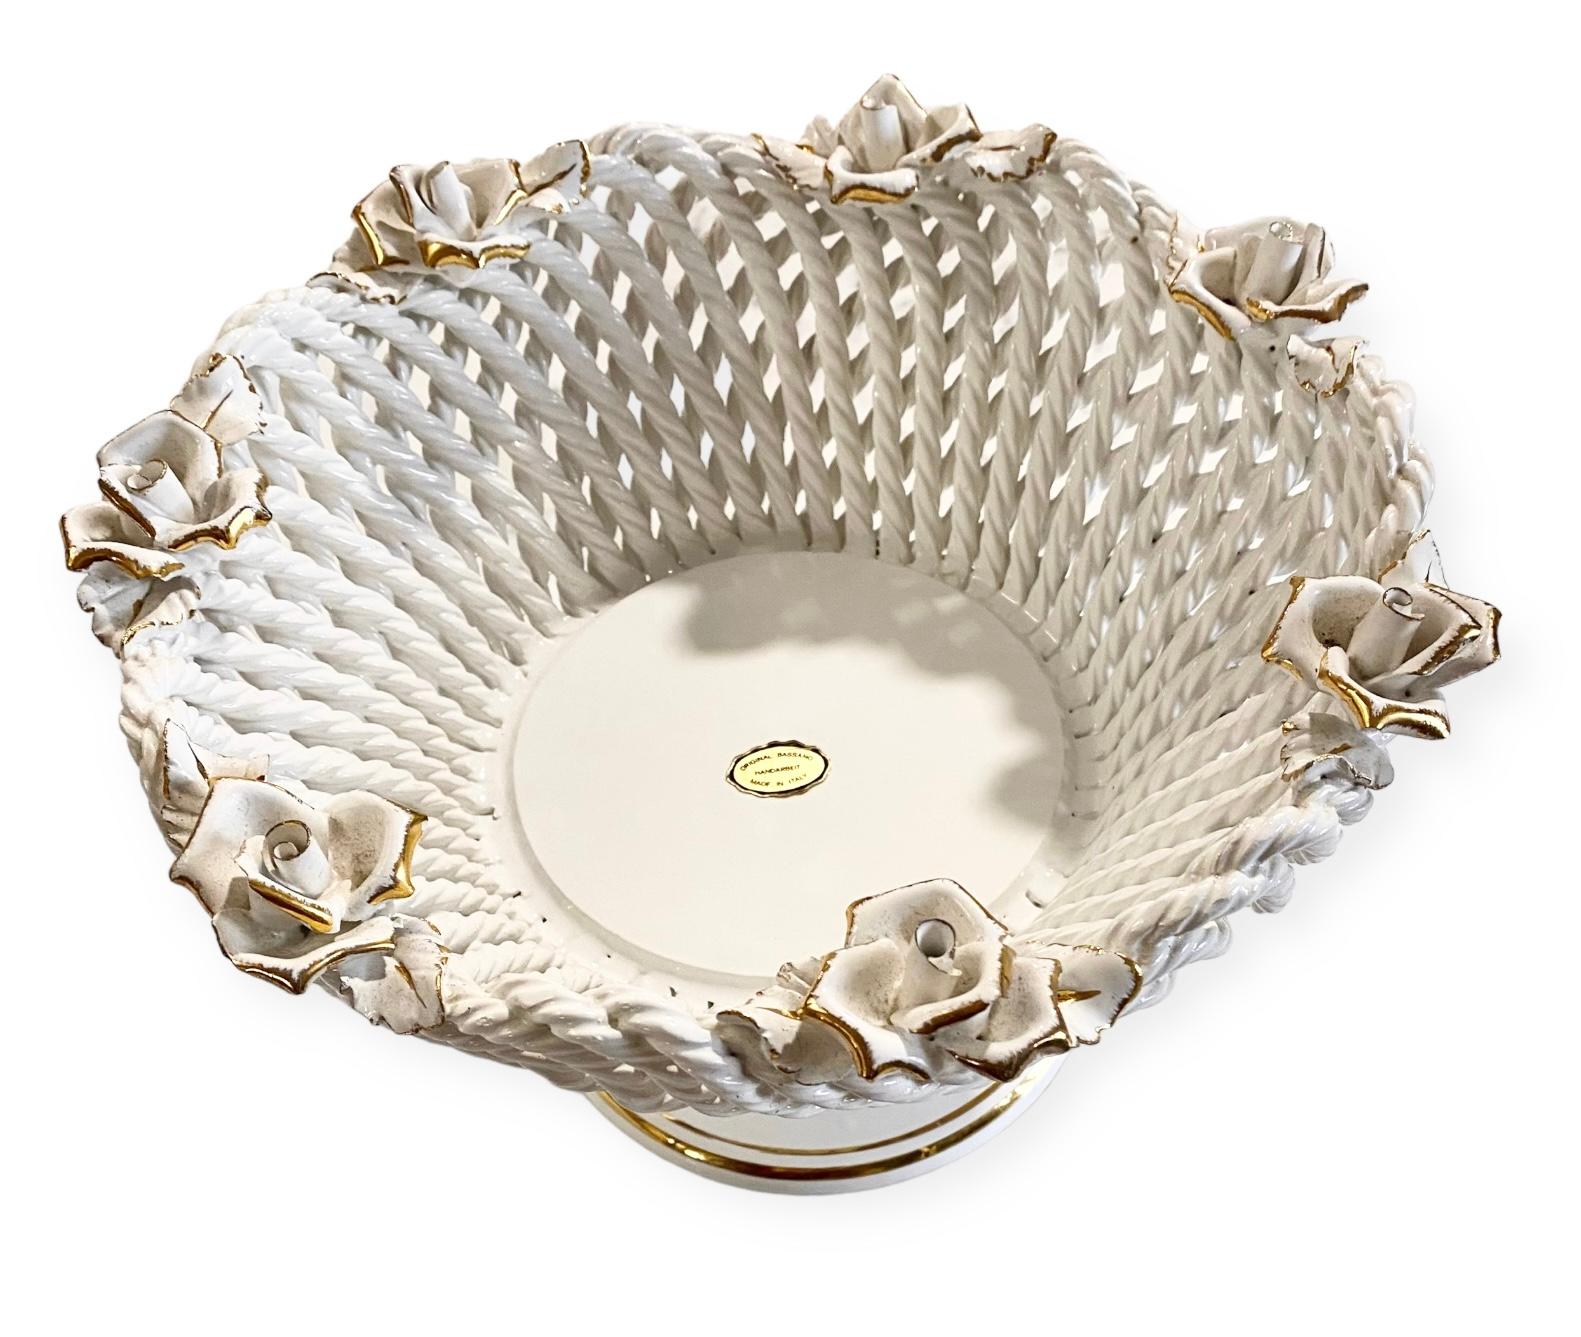 A lovely, vintage Bassano reticulated, white ceramic fruit bowl/centerpiece adorned with gilt trimmed roses. The perfect touch for a well appointed room.

In Bassano ceramics have been produced for 300 years. In fact, from the 17th century this art